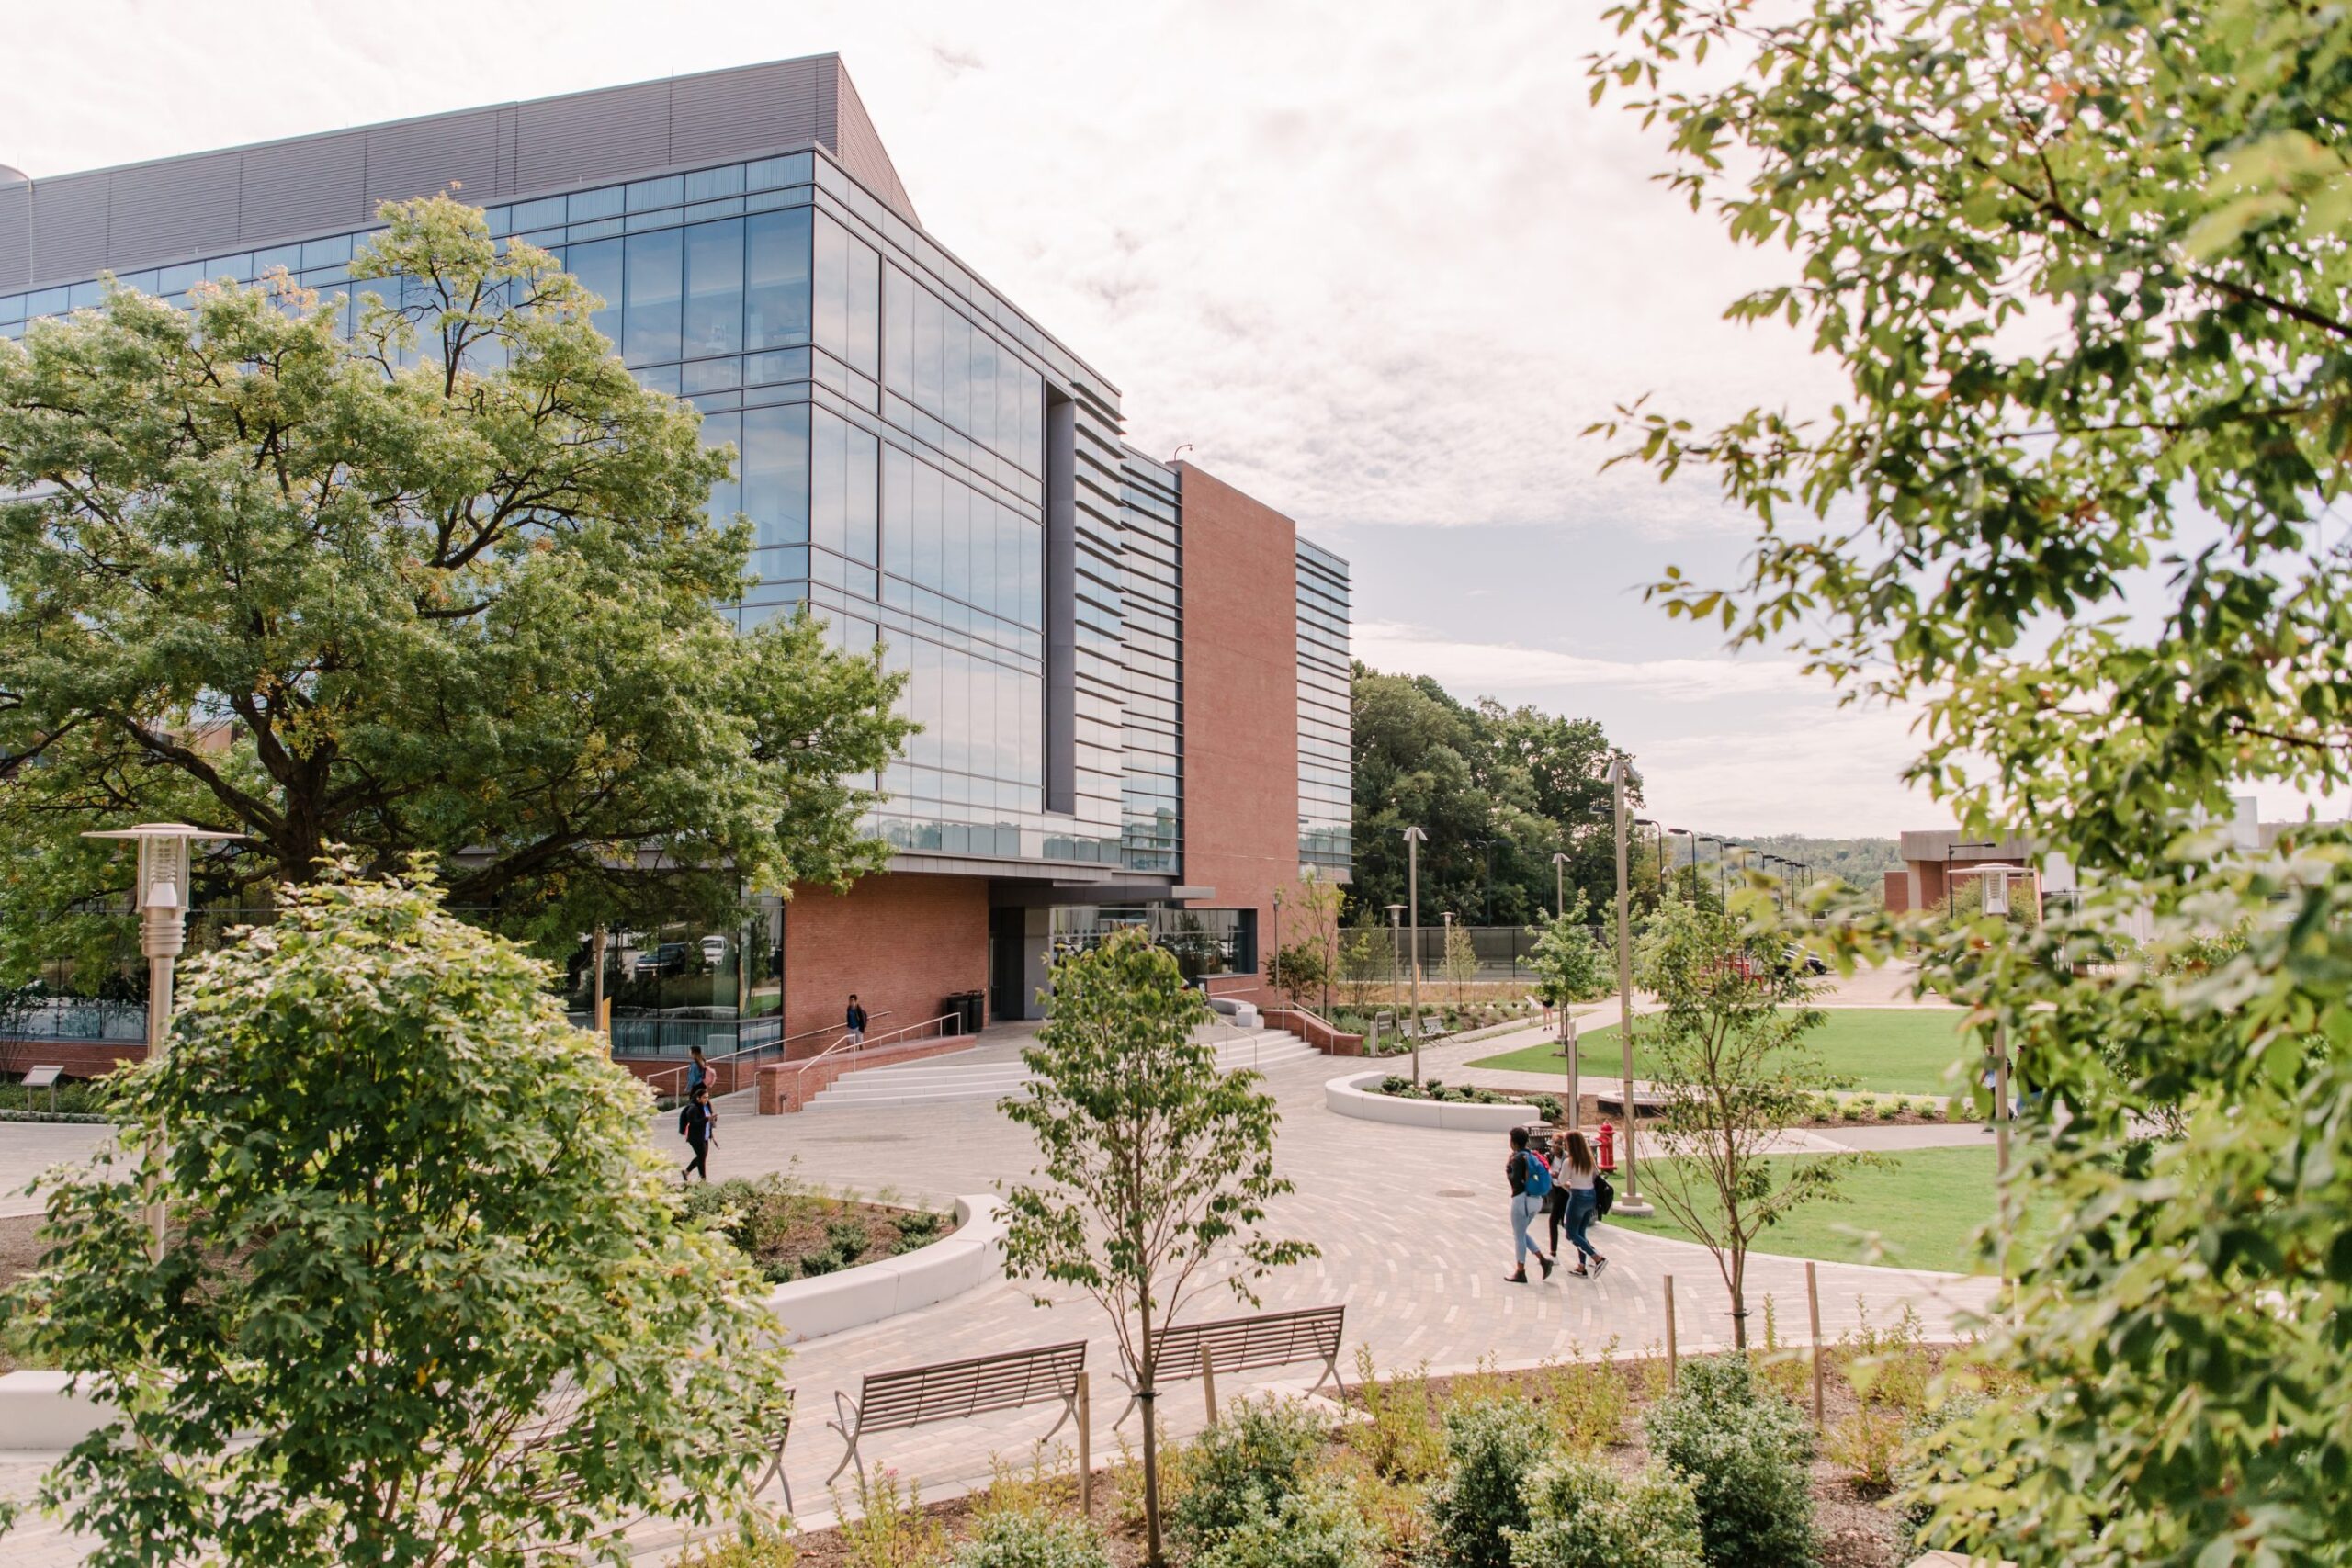 2020 U.S. News global ranking names UMBC a top university, a leader in geosciences and space science